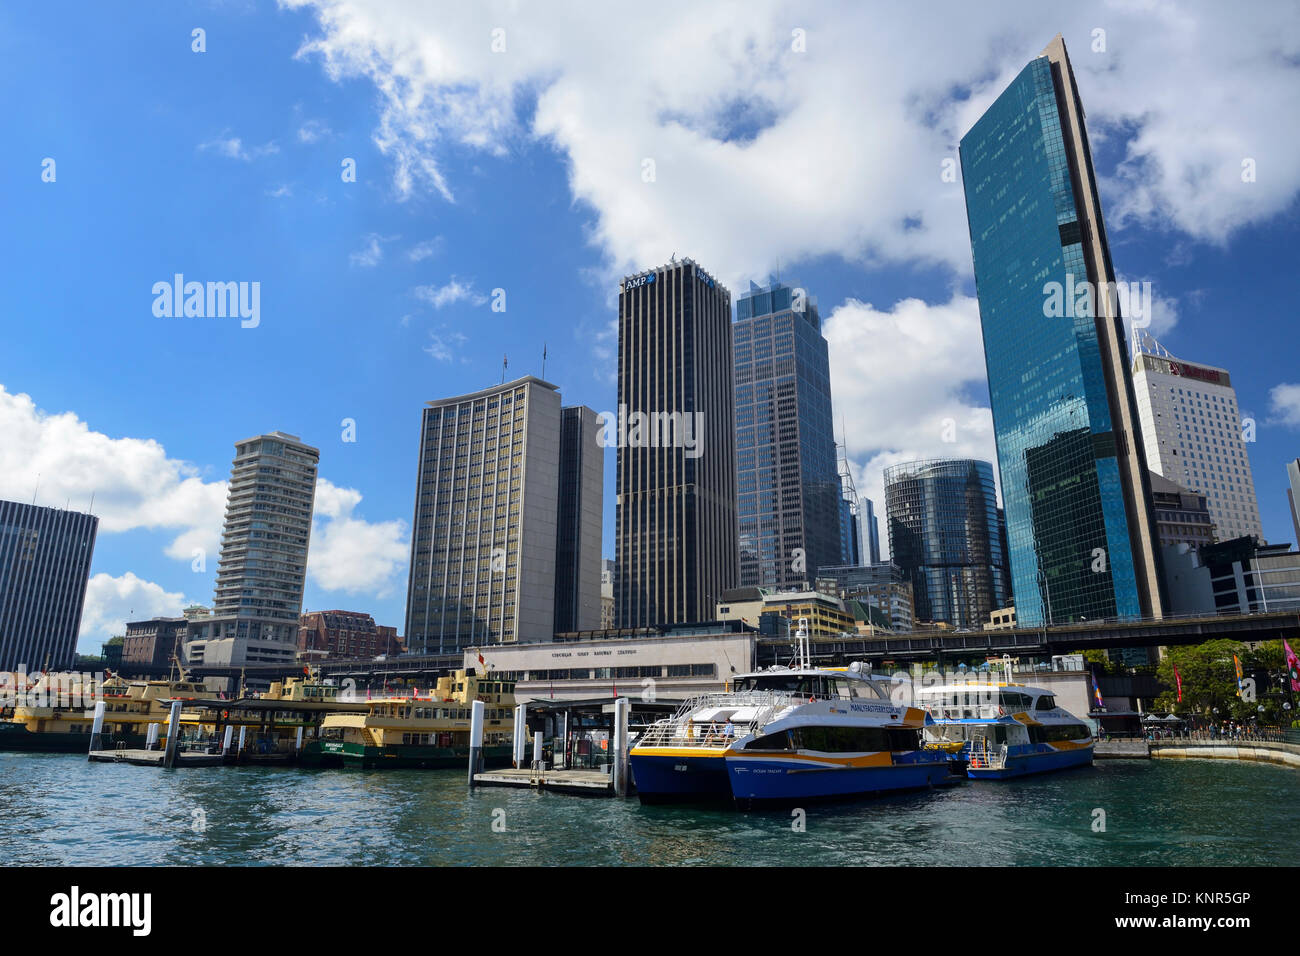 Ferry terminal on Circular Quay surrounded by high-rise buildings in Sydney Central Business District - Sydney, New South Wales, Australia Stock Photo